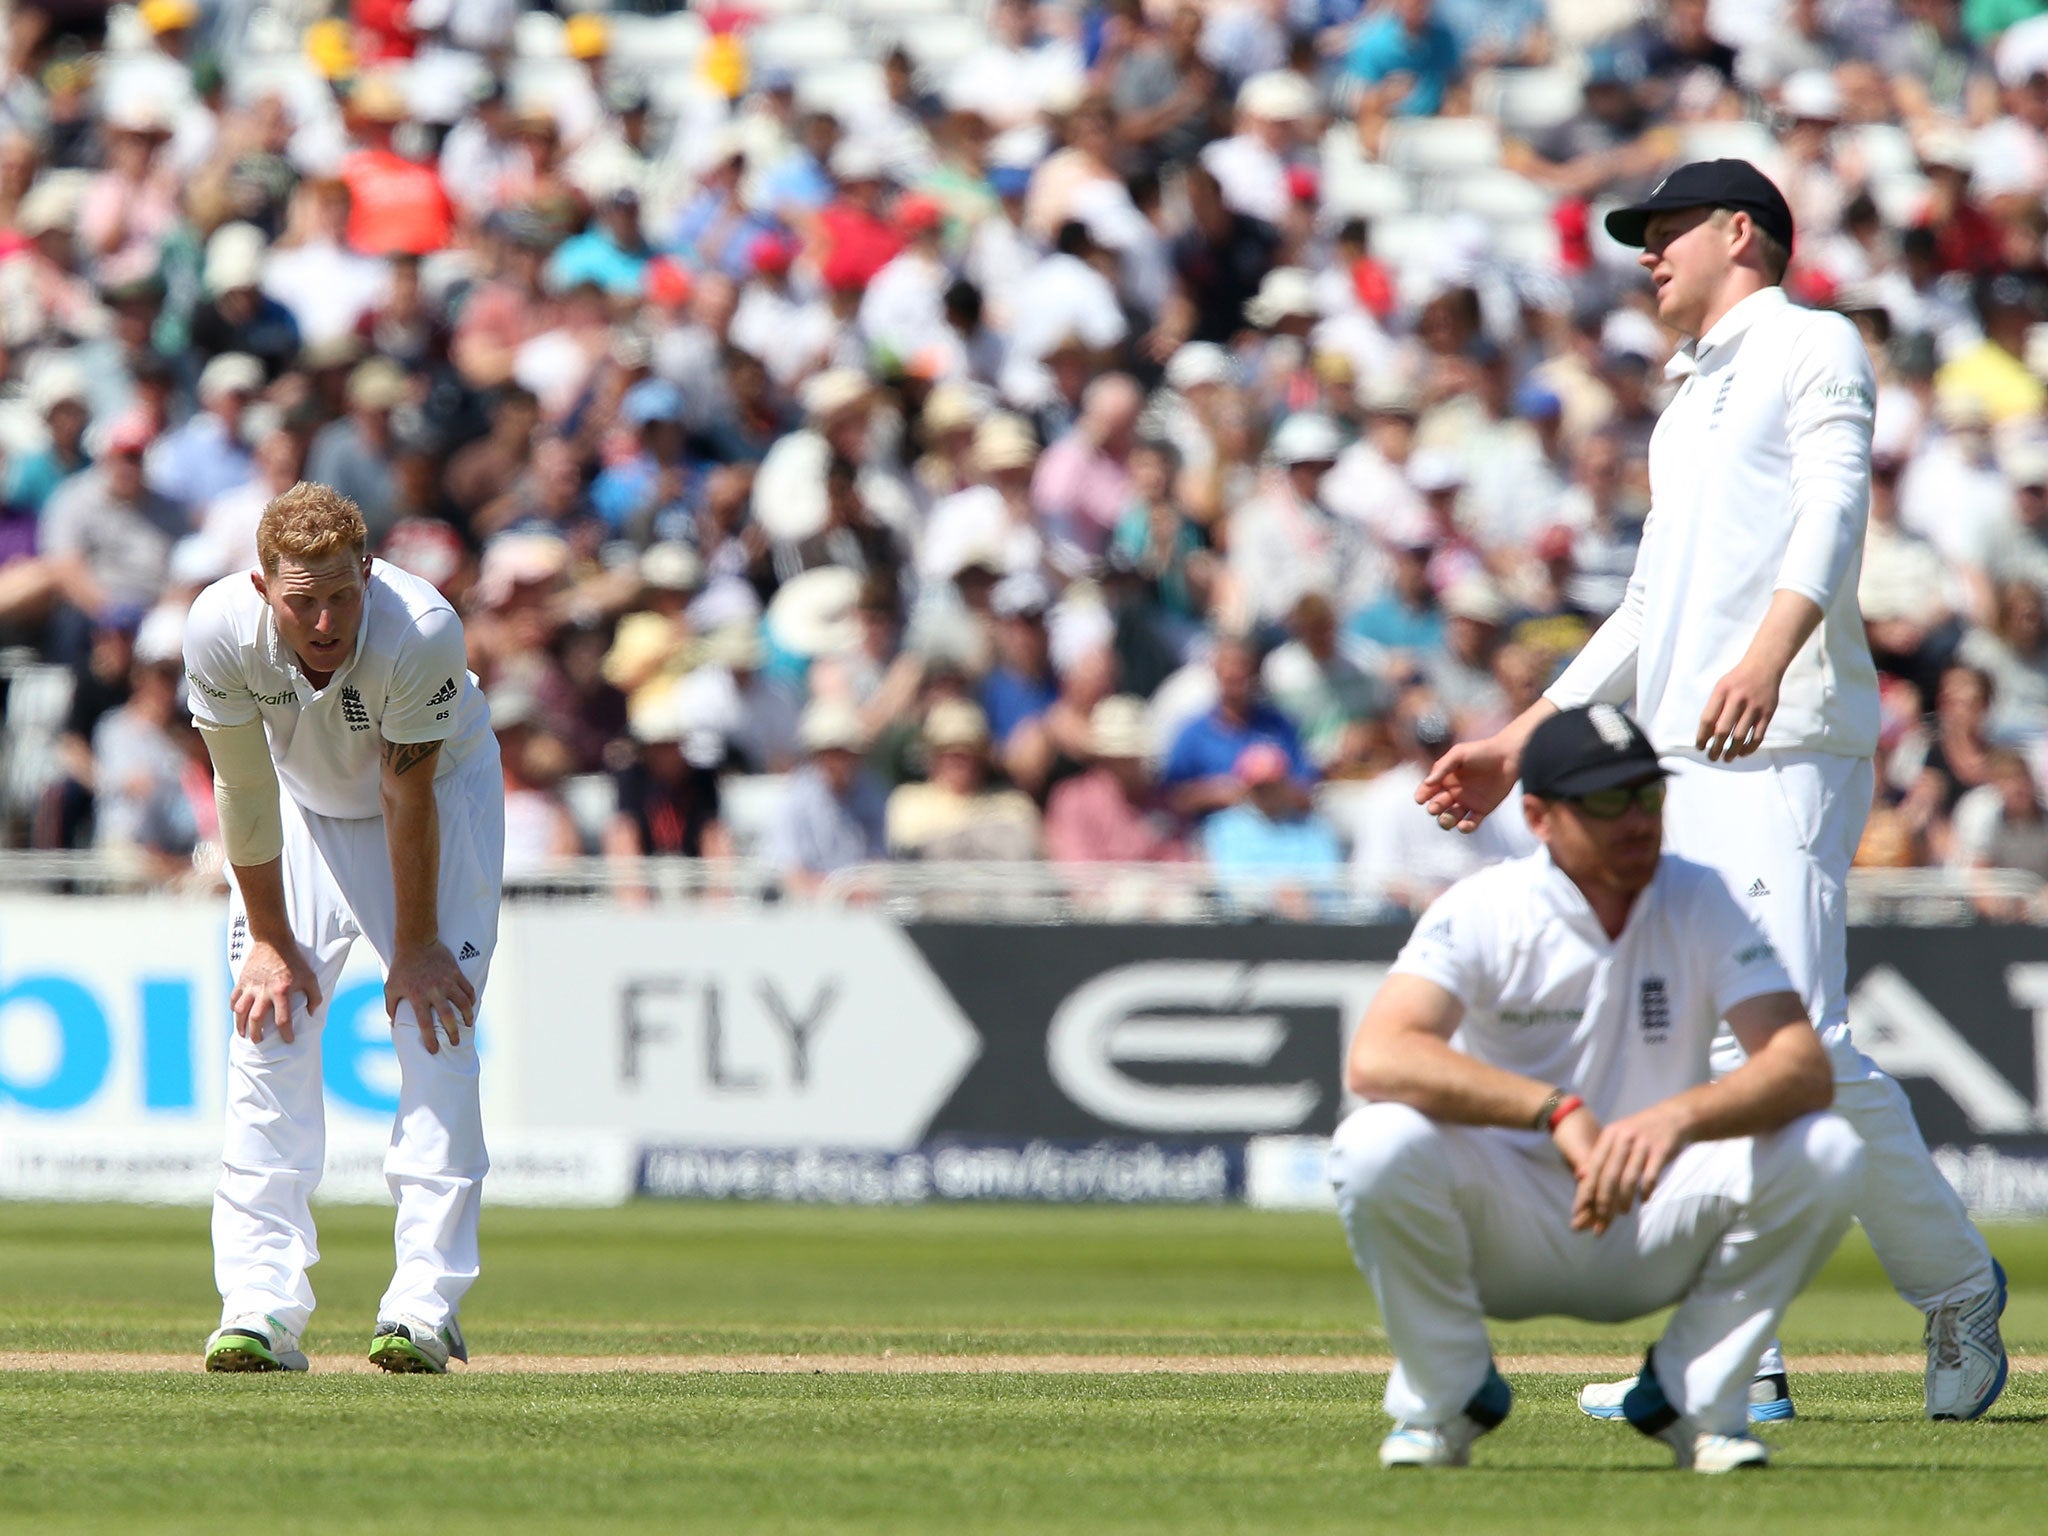 Ben Stokes of England (L) looks on dejected after a missed chance during day two of the 1st Investec Test between England and India at Trent Bridge